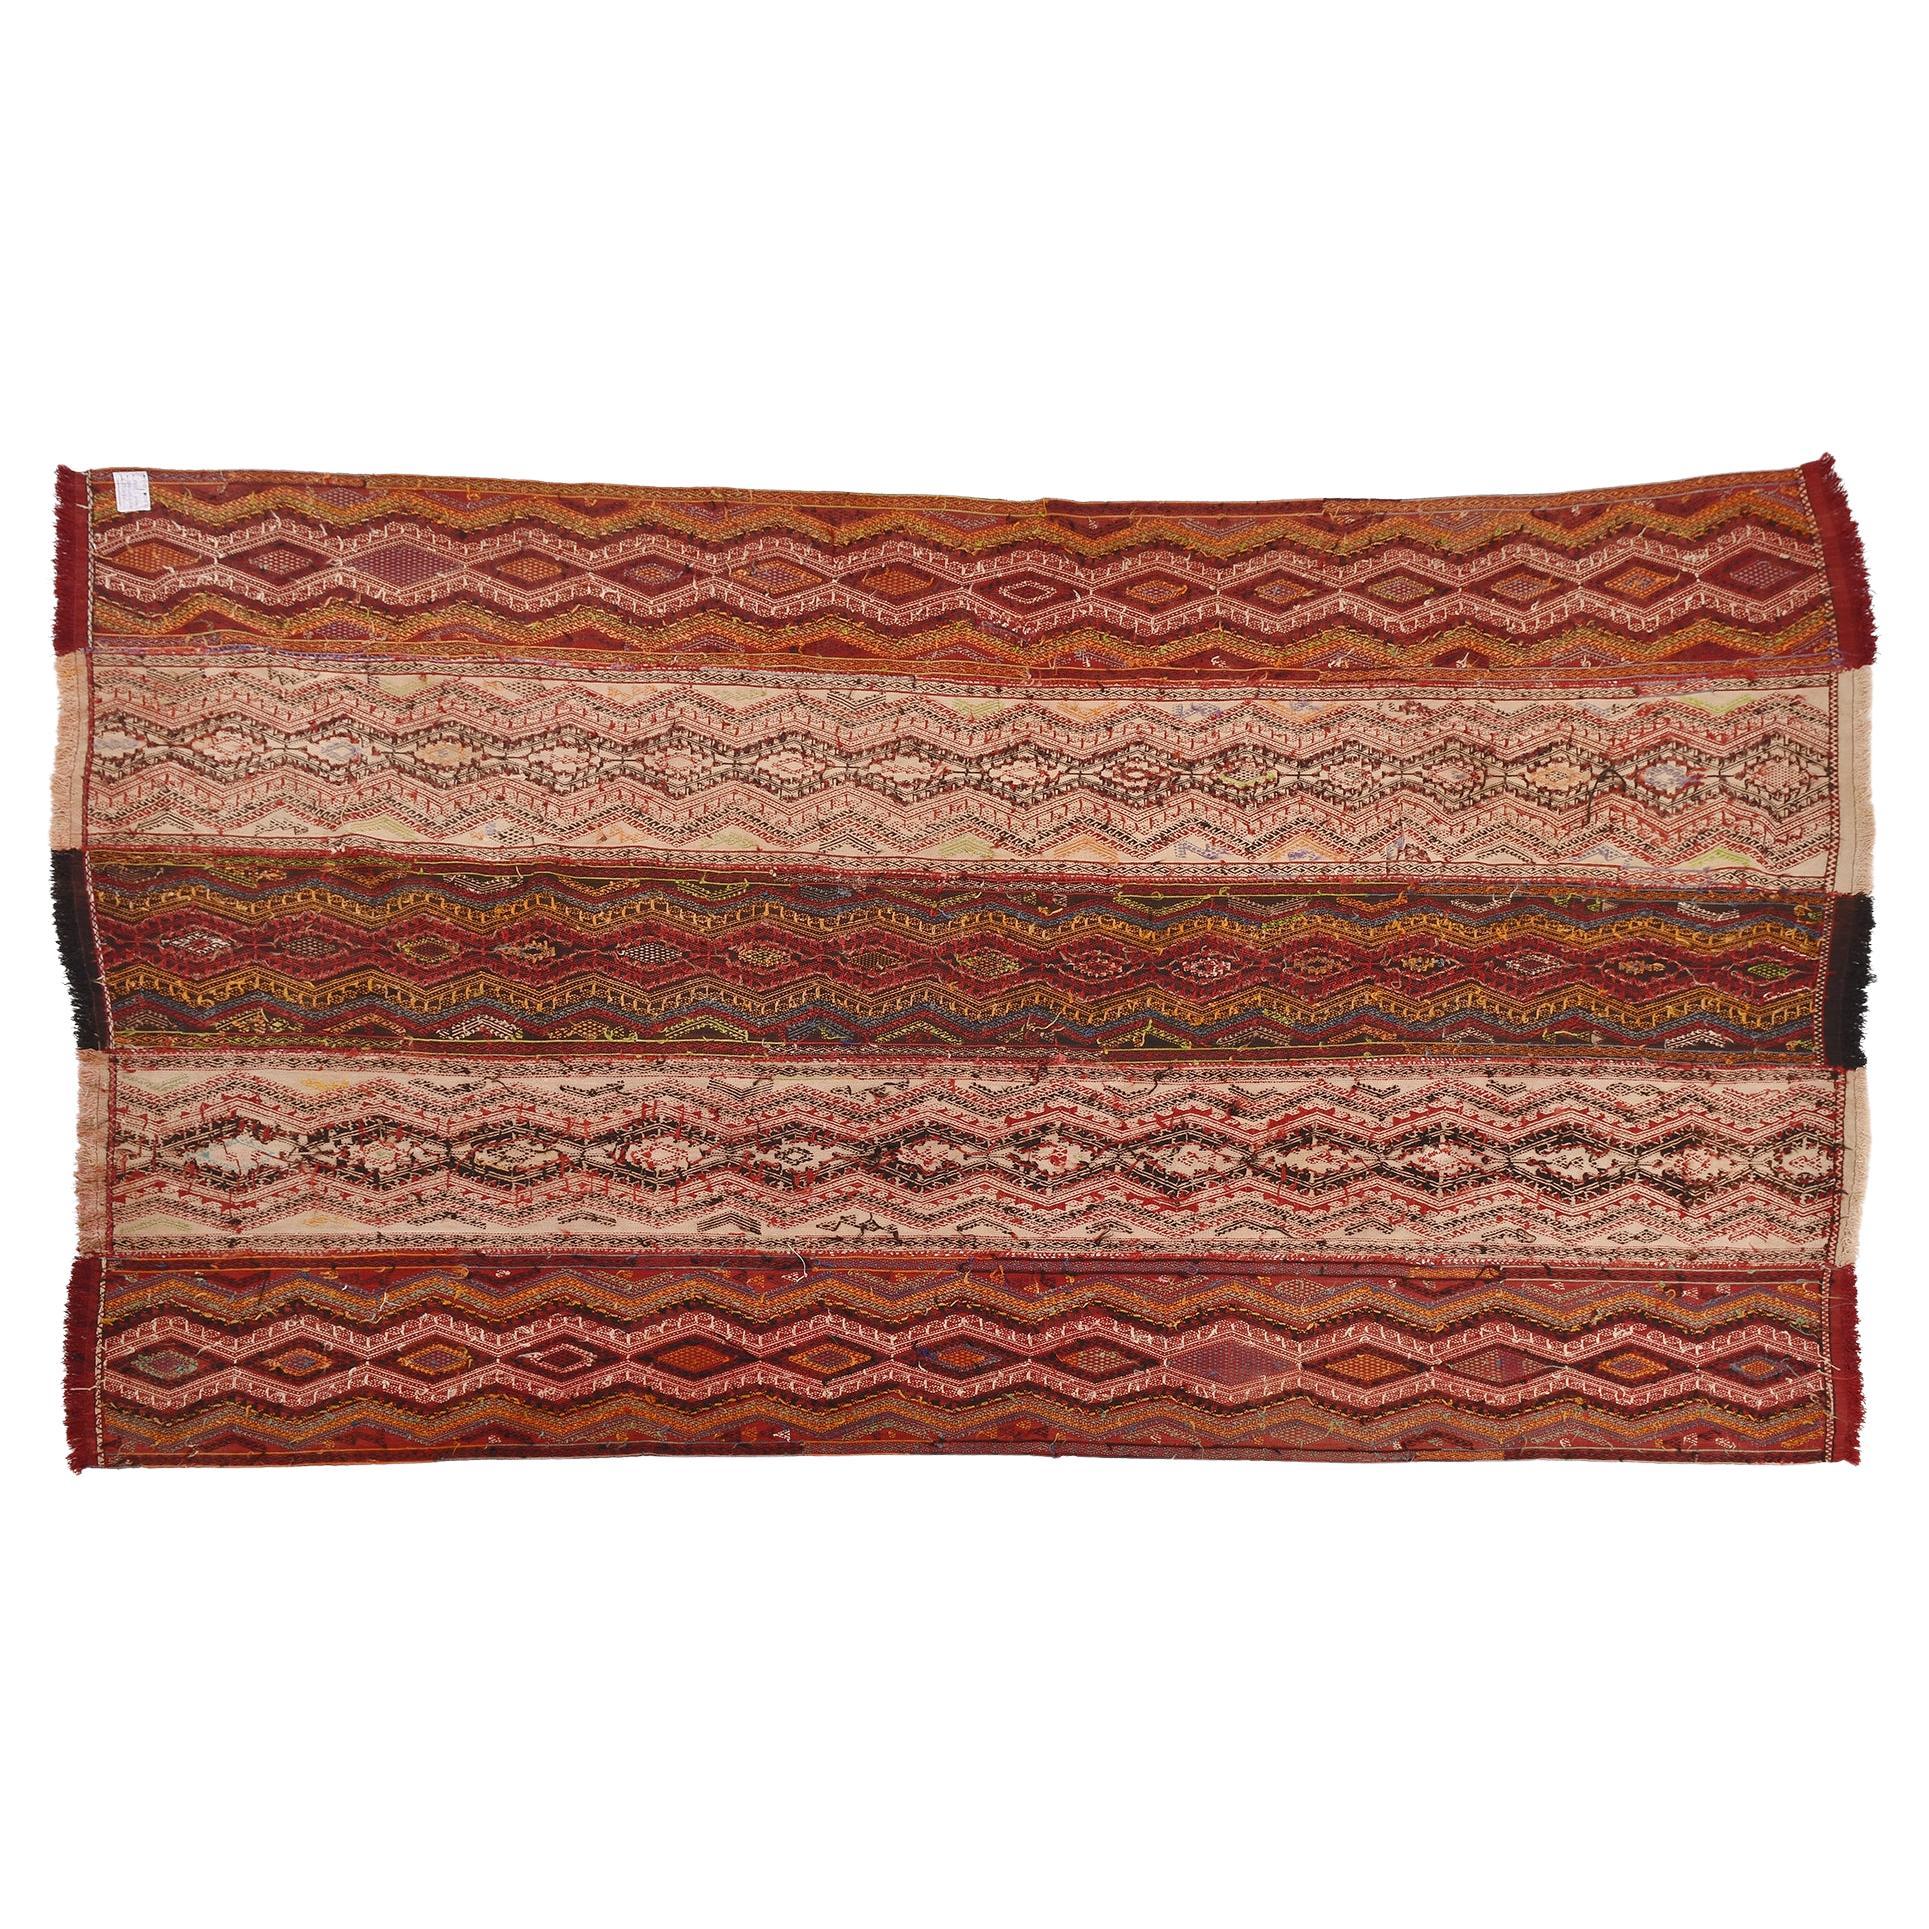 nr. 855 - Turkish kilim of old manufacture, perfect in weaving and accurate geometric design.
It was used on wooden platforms, not on the ground like other kilims, or hung.
We would place it on the sofa or bed or (why not?) on the wall as a